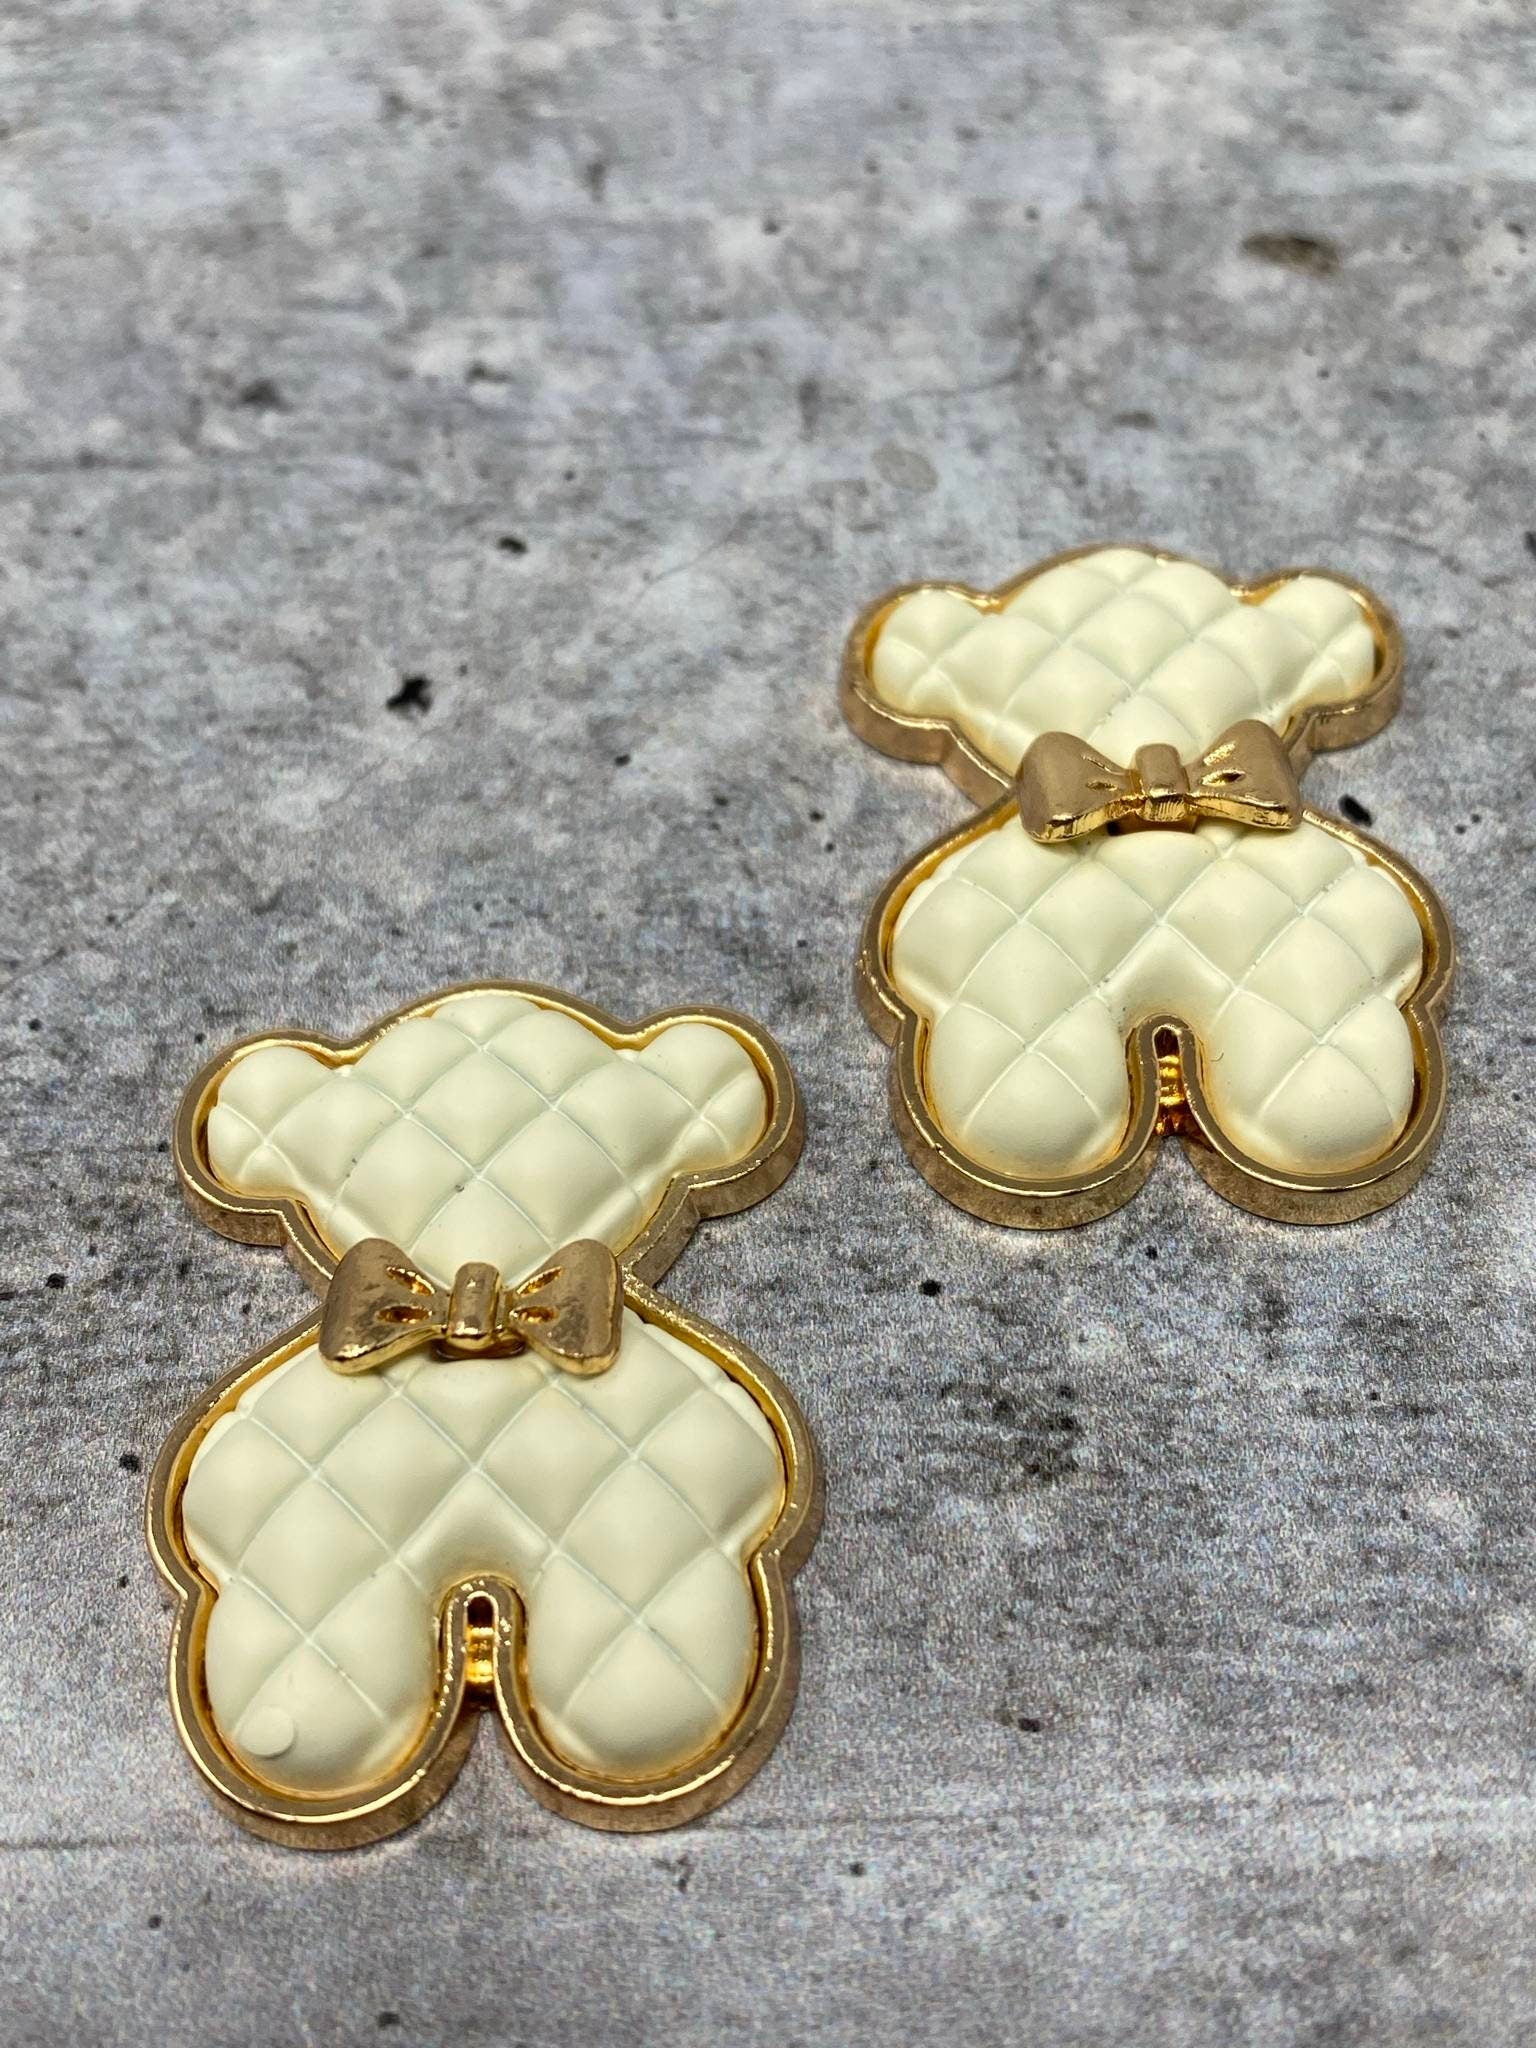 Exclusive, Cream "Bear" Tufted w/Gold Bow Charm, 1-pc Flatback Charm for CR O CS, Phone Cases, Sunglasses, Decor, and More! Size 2"